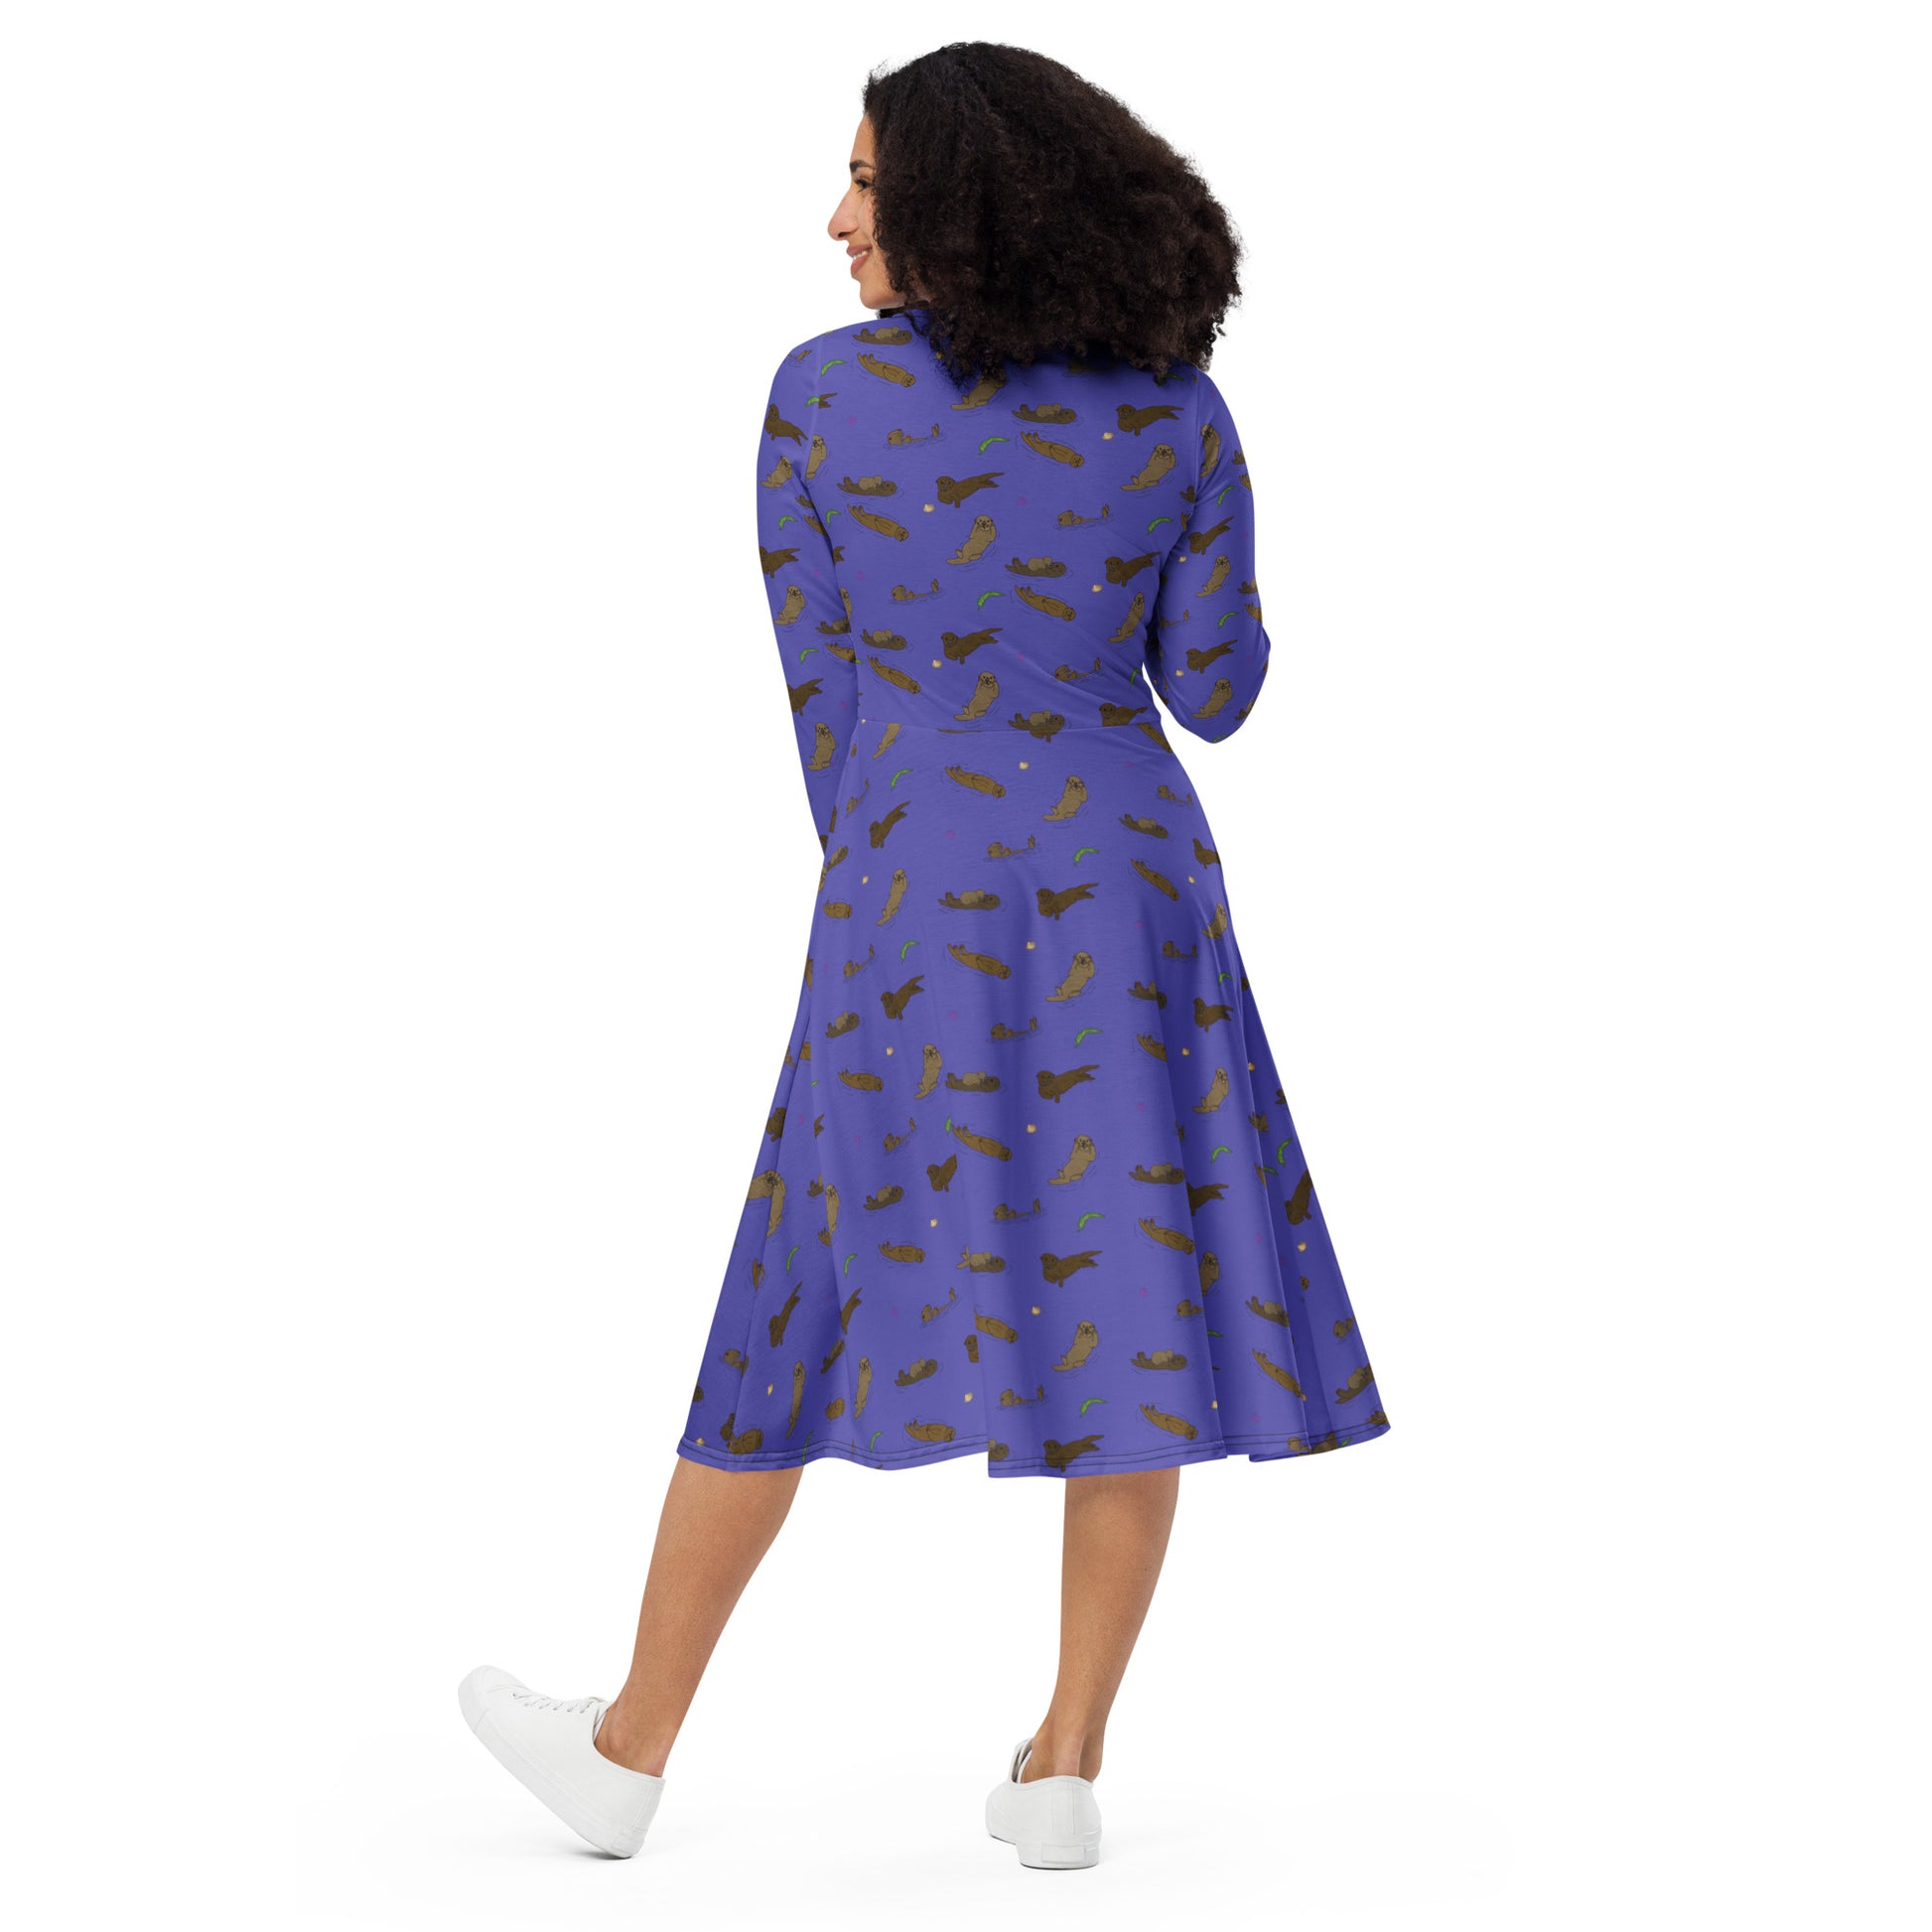 Long sleeve midi dress with fitted waist, flared bottom, and side pockets. Features a patterned design of sea otters, seashells, seaweed, and sea urchins on a purple background. Back view shown on female model.